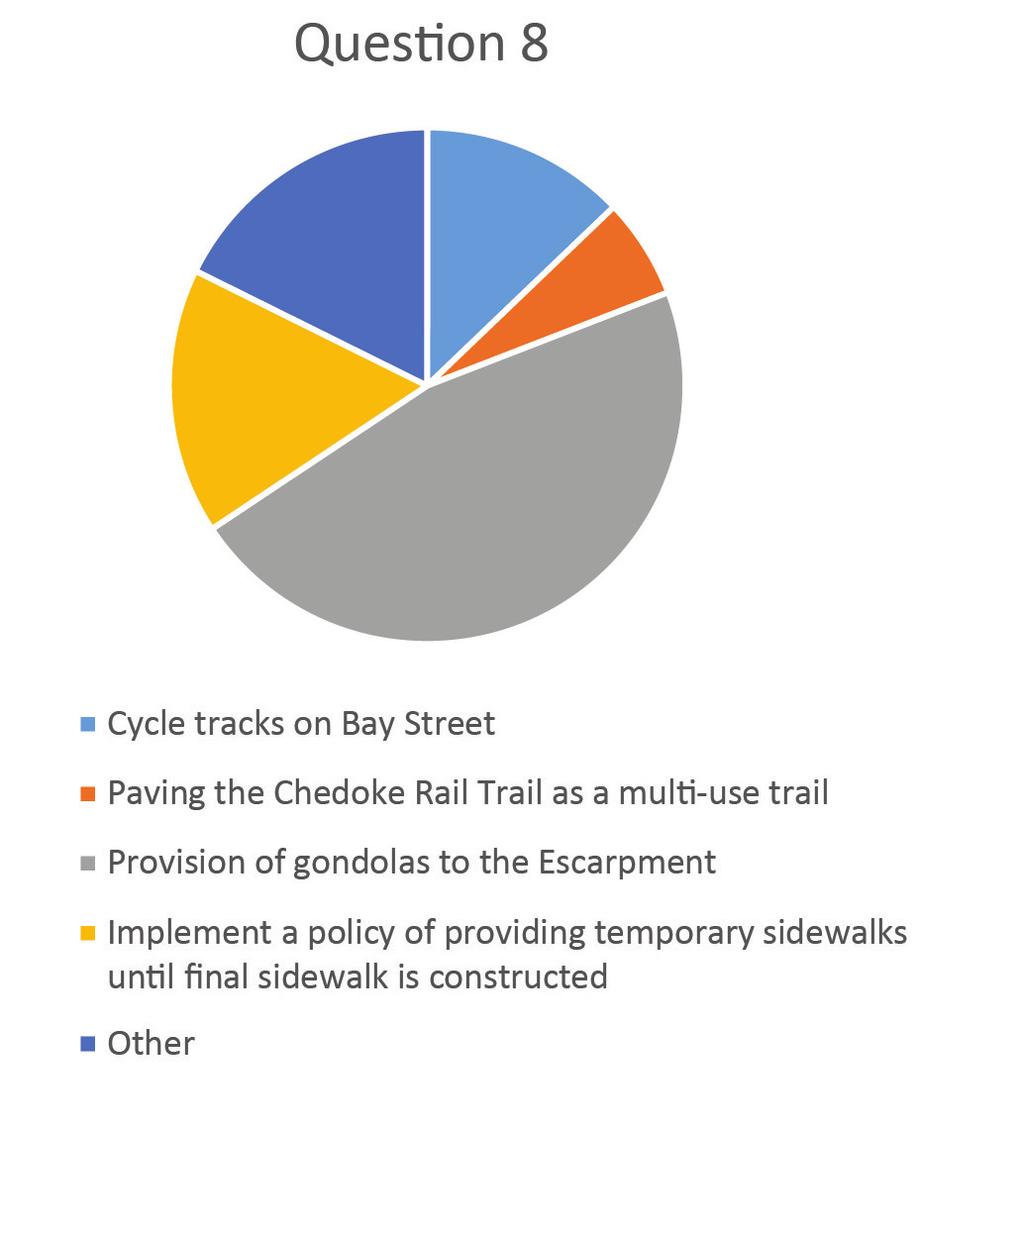 Question 8: Which of the following bicycle network and pedestrian network improvements would you consider the best benefit to the overall system?